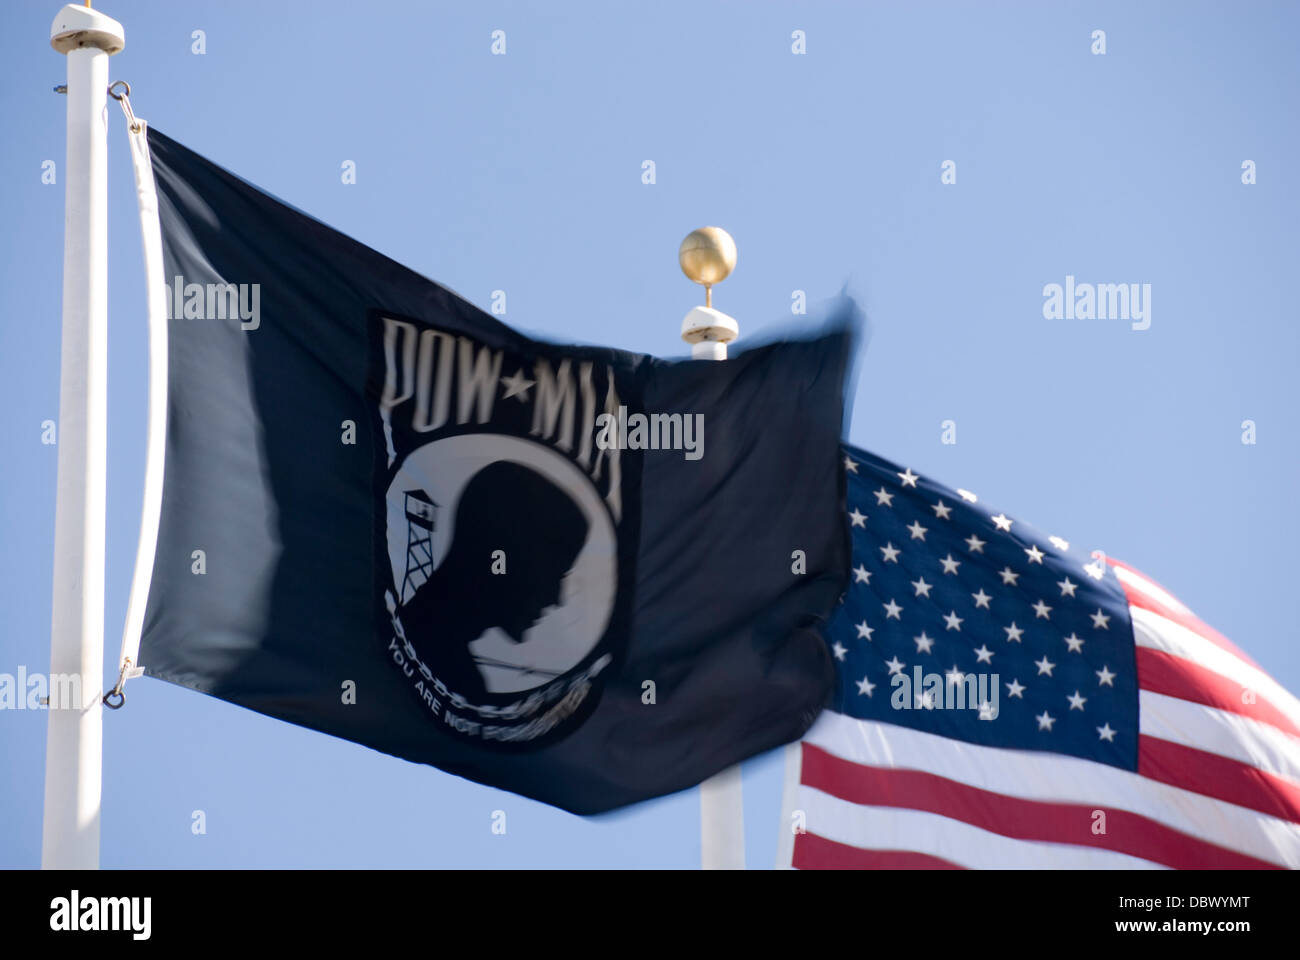 Close up on black pow mia flag and stars and stripes American flag flying together, USA Stock Photo